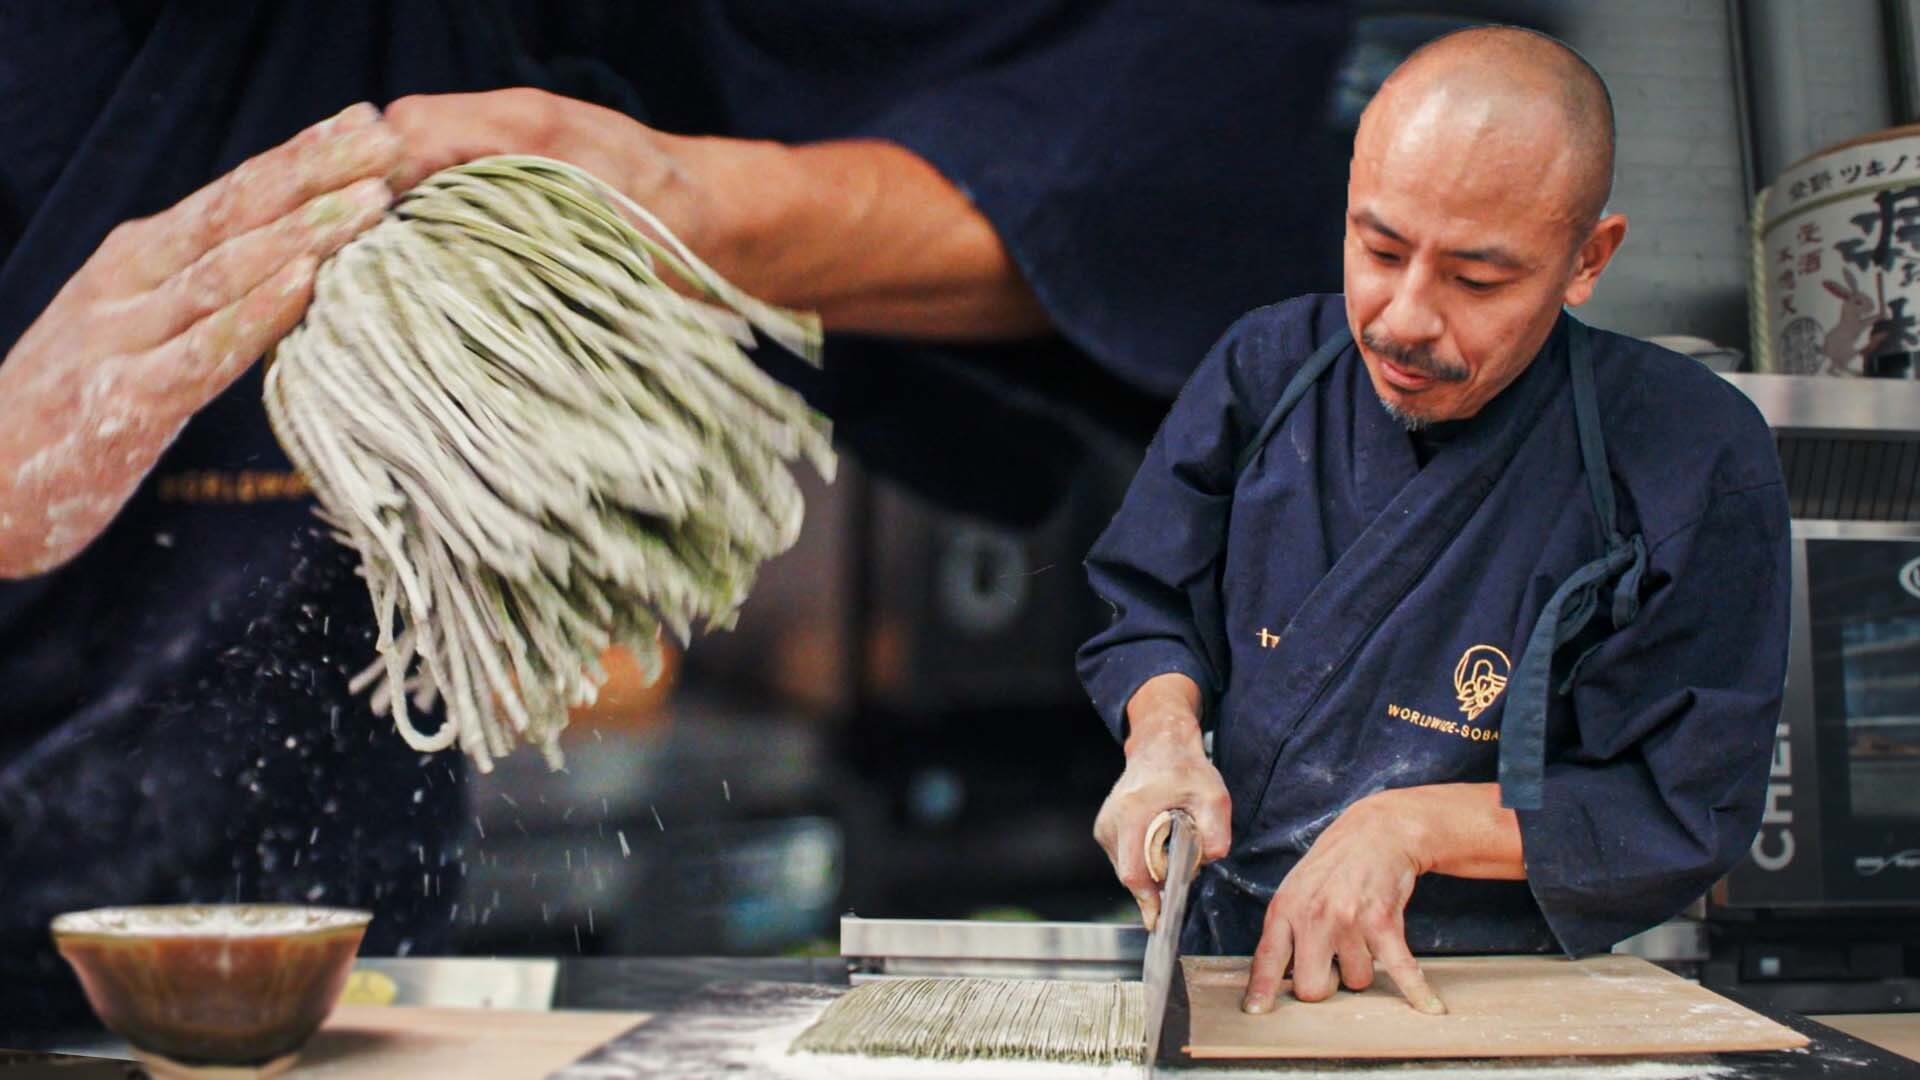 The Soba Master Hand-Making Some of the World's Most Difficult Noodles - Bon Appetit